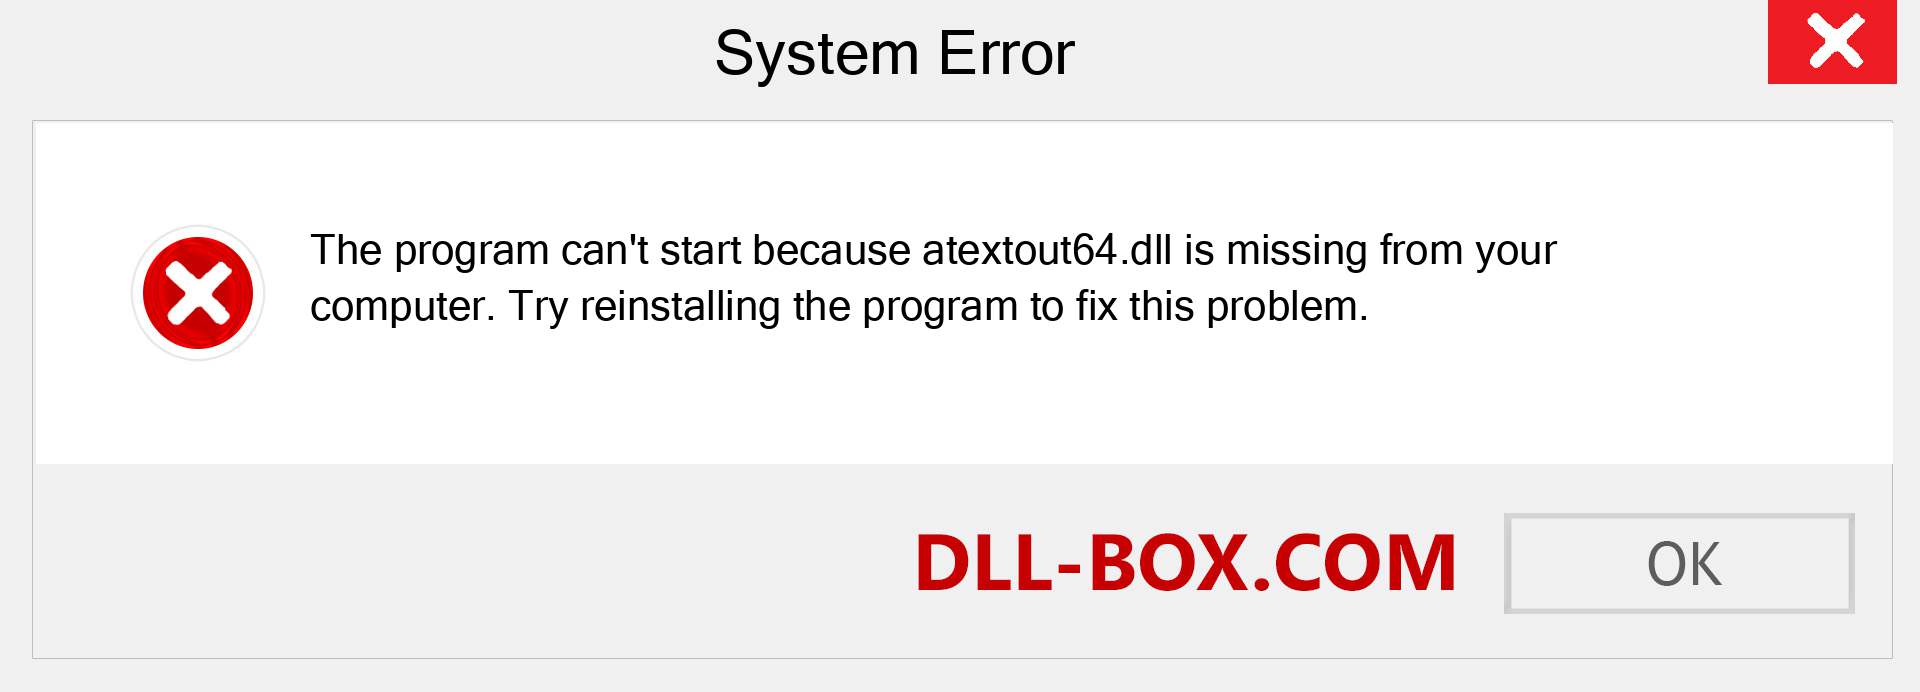  atextout64.dll file is missing?. Download for Windows 7, 8, 10 - Fix  atextout64 dll Missing Error on Windows, photos, images